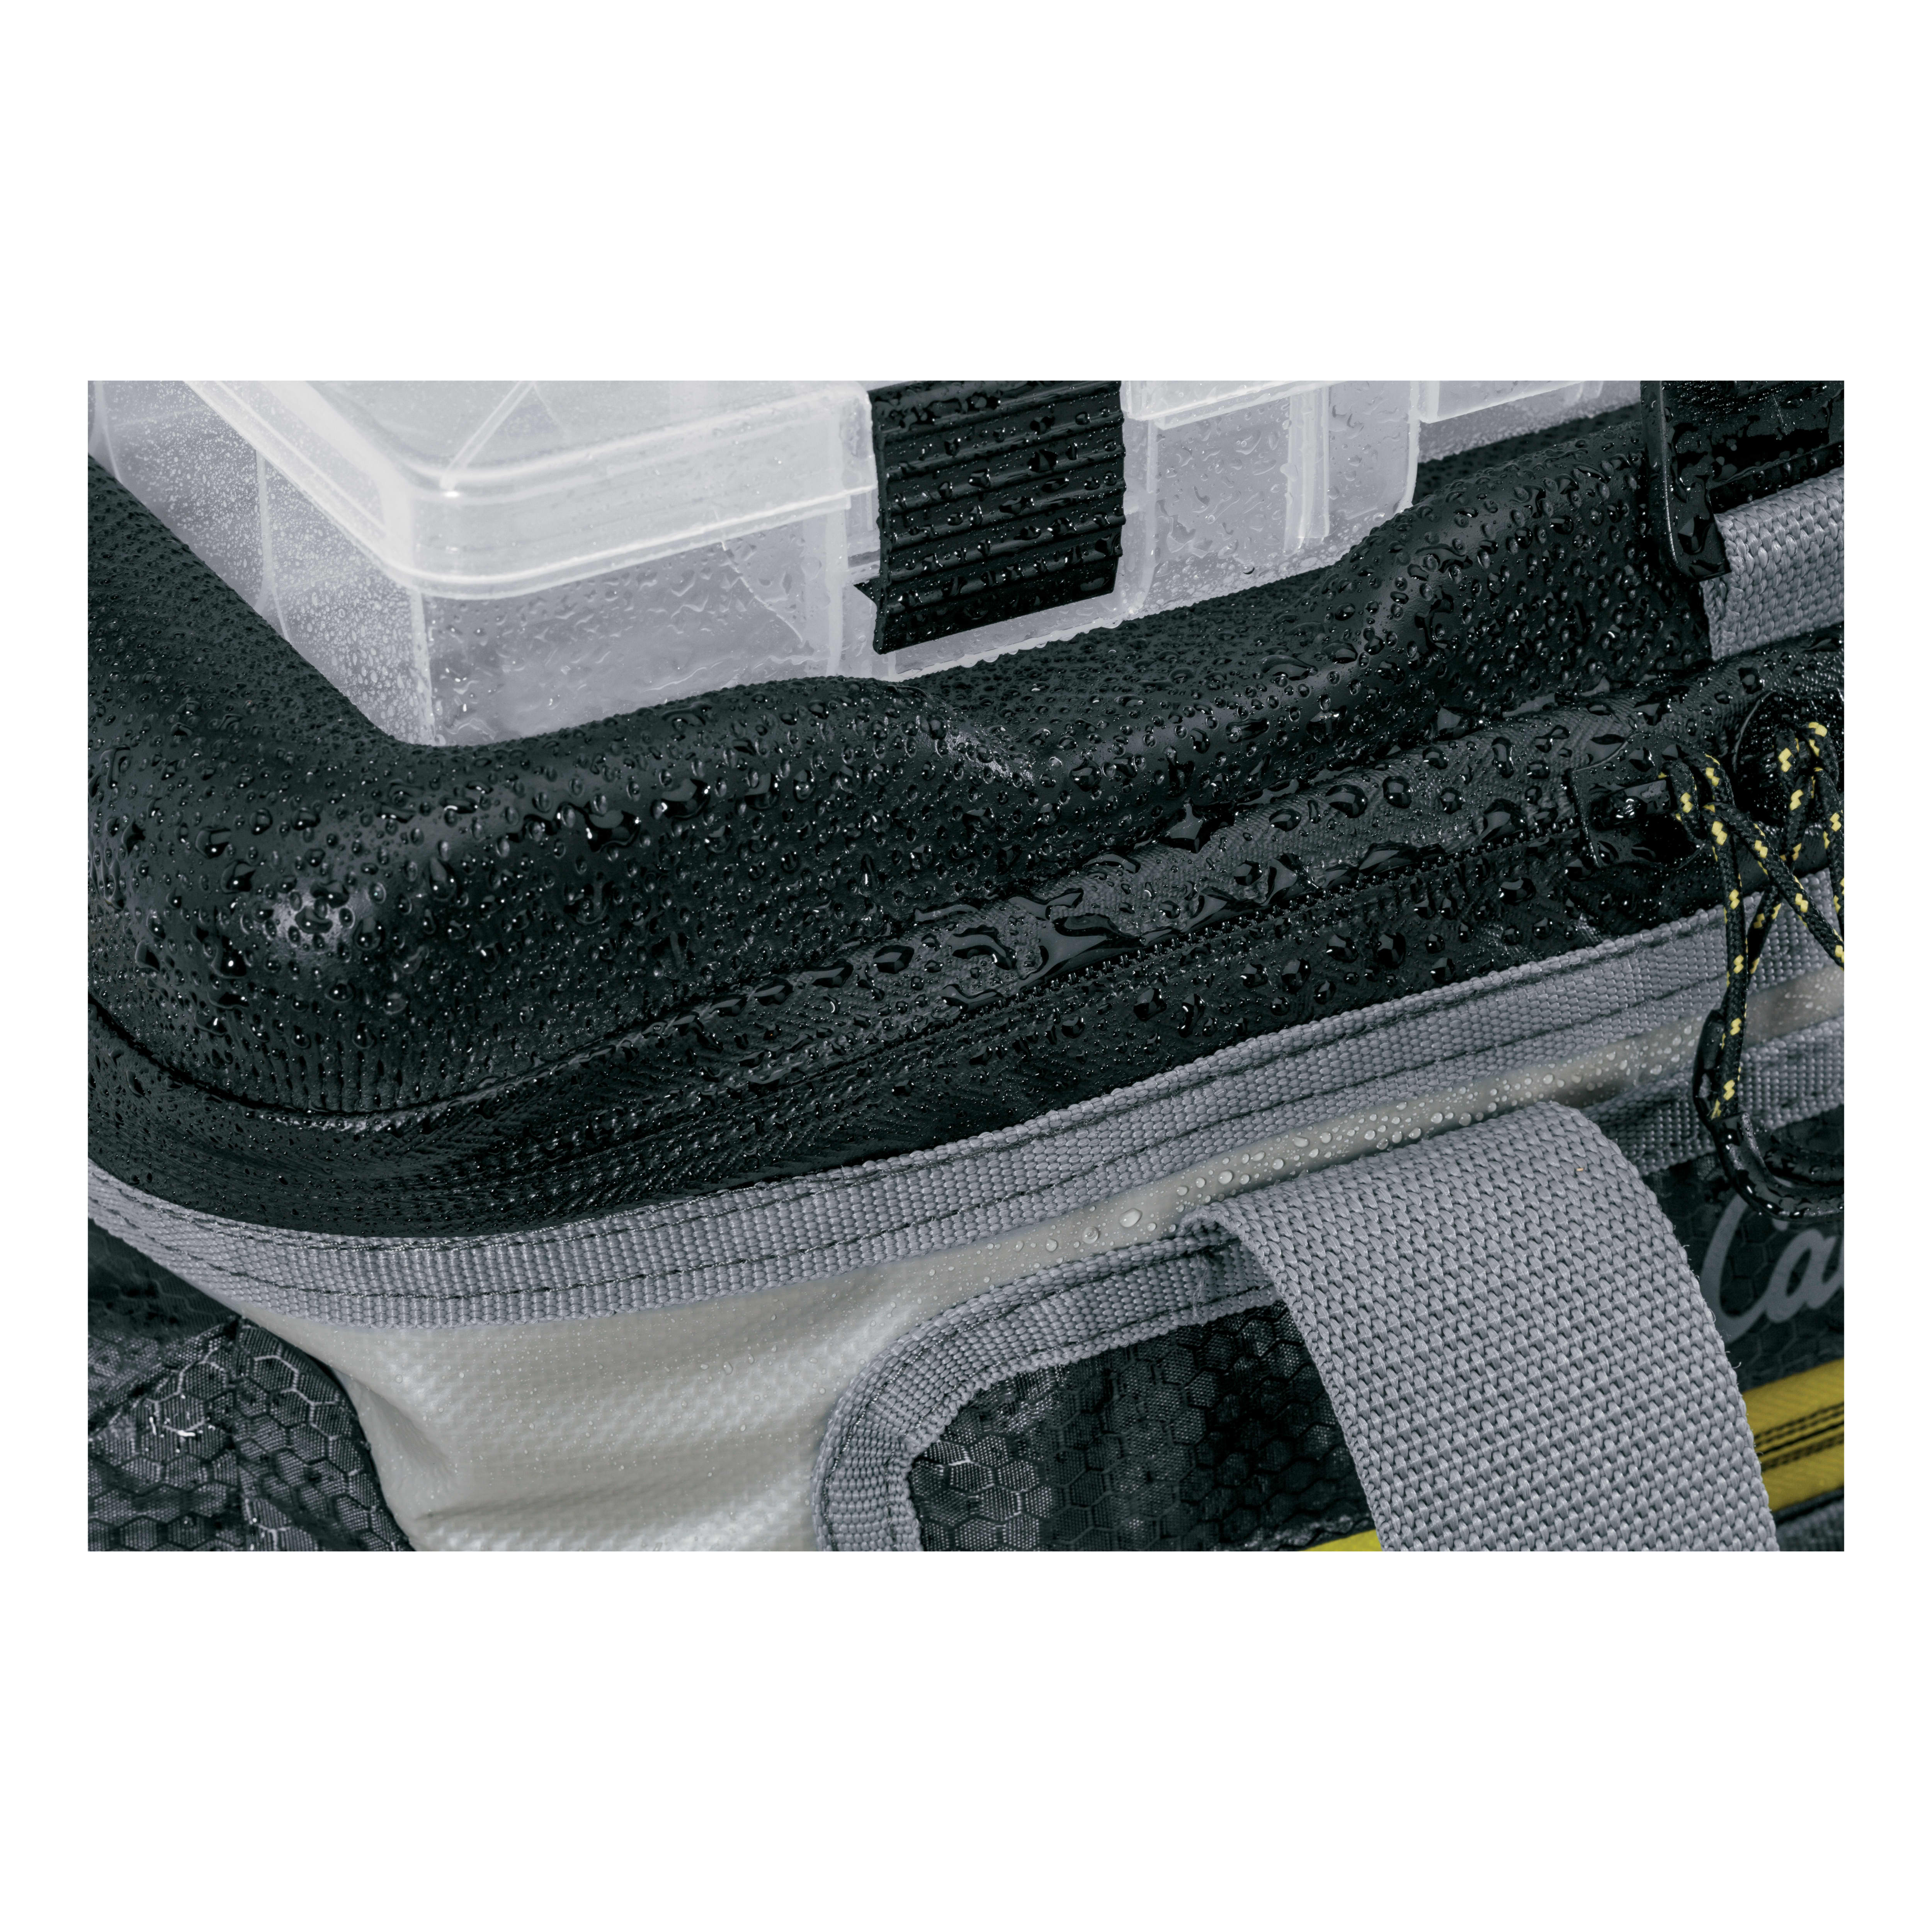 Cabela's Marine-Grade Tackle Bag with Utility Box - Water-Resistant